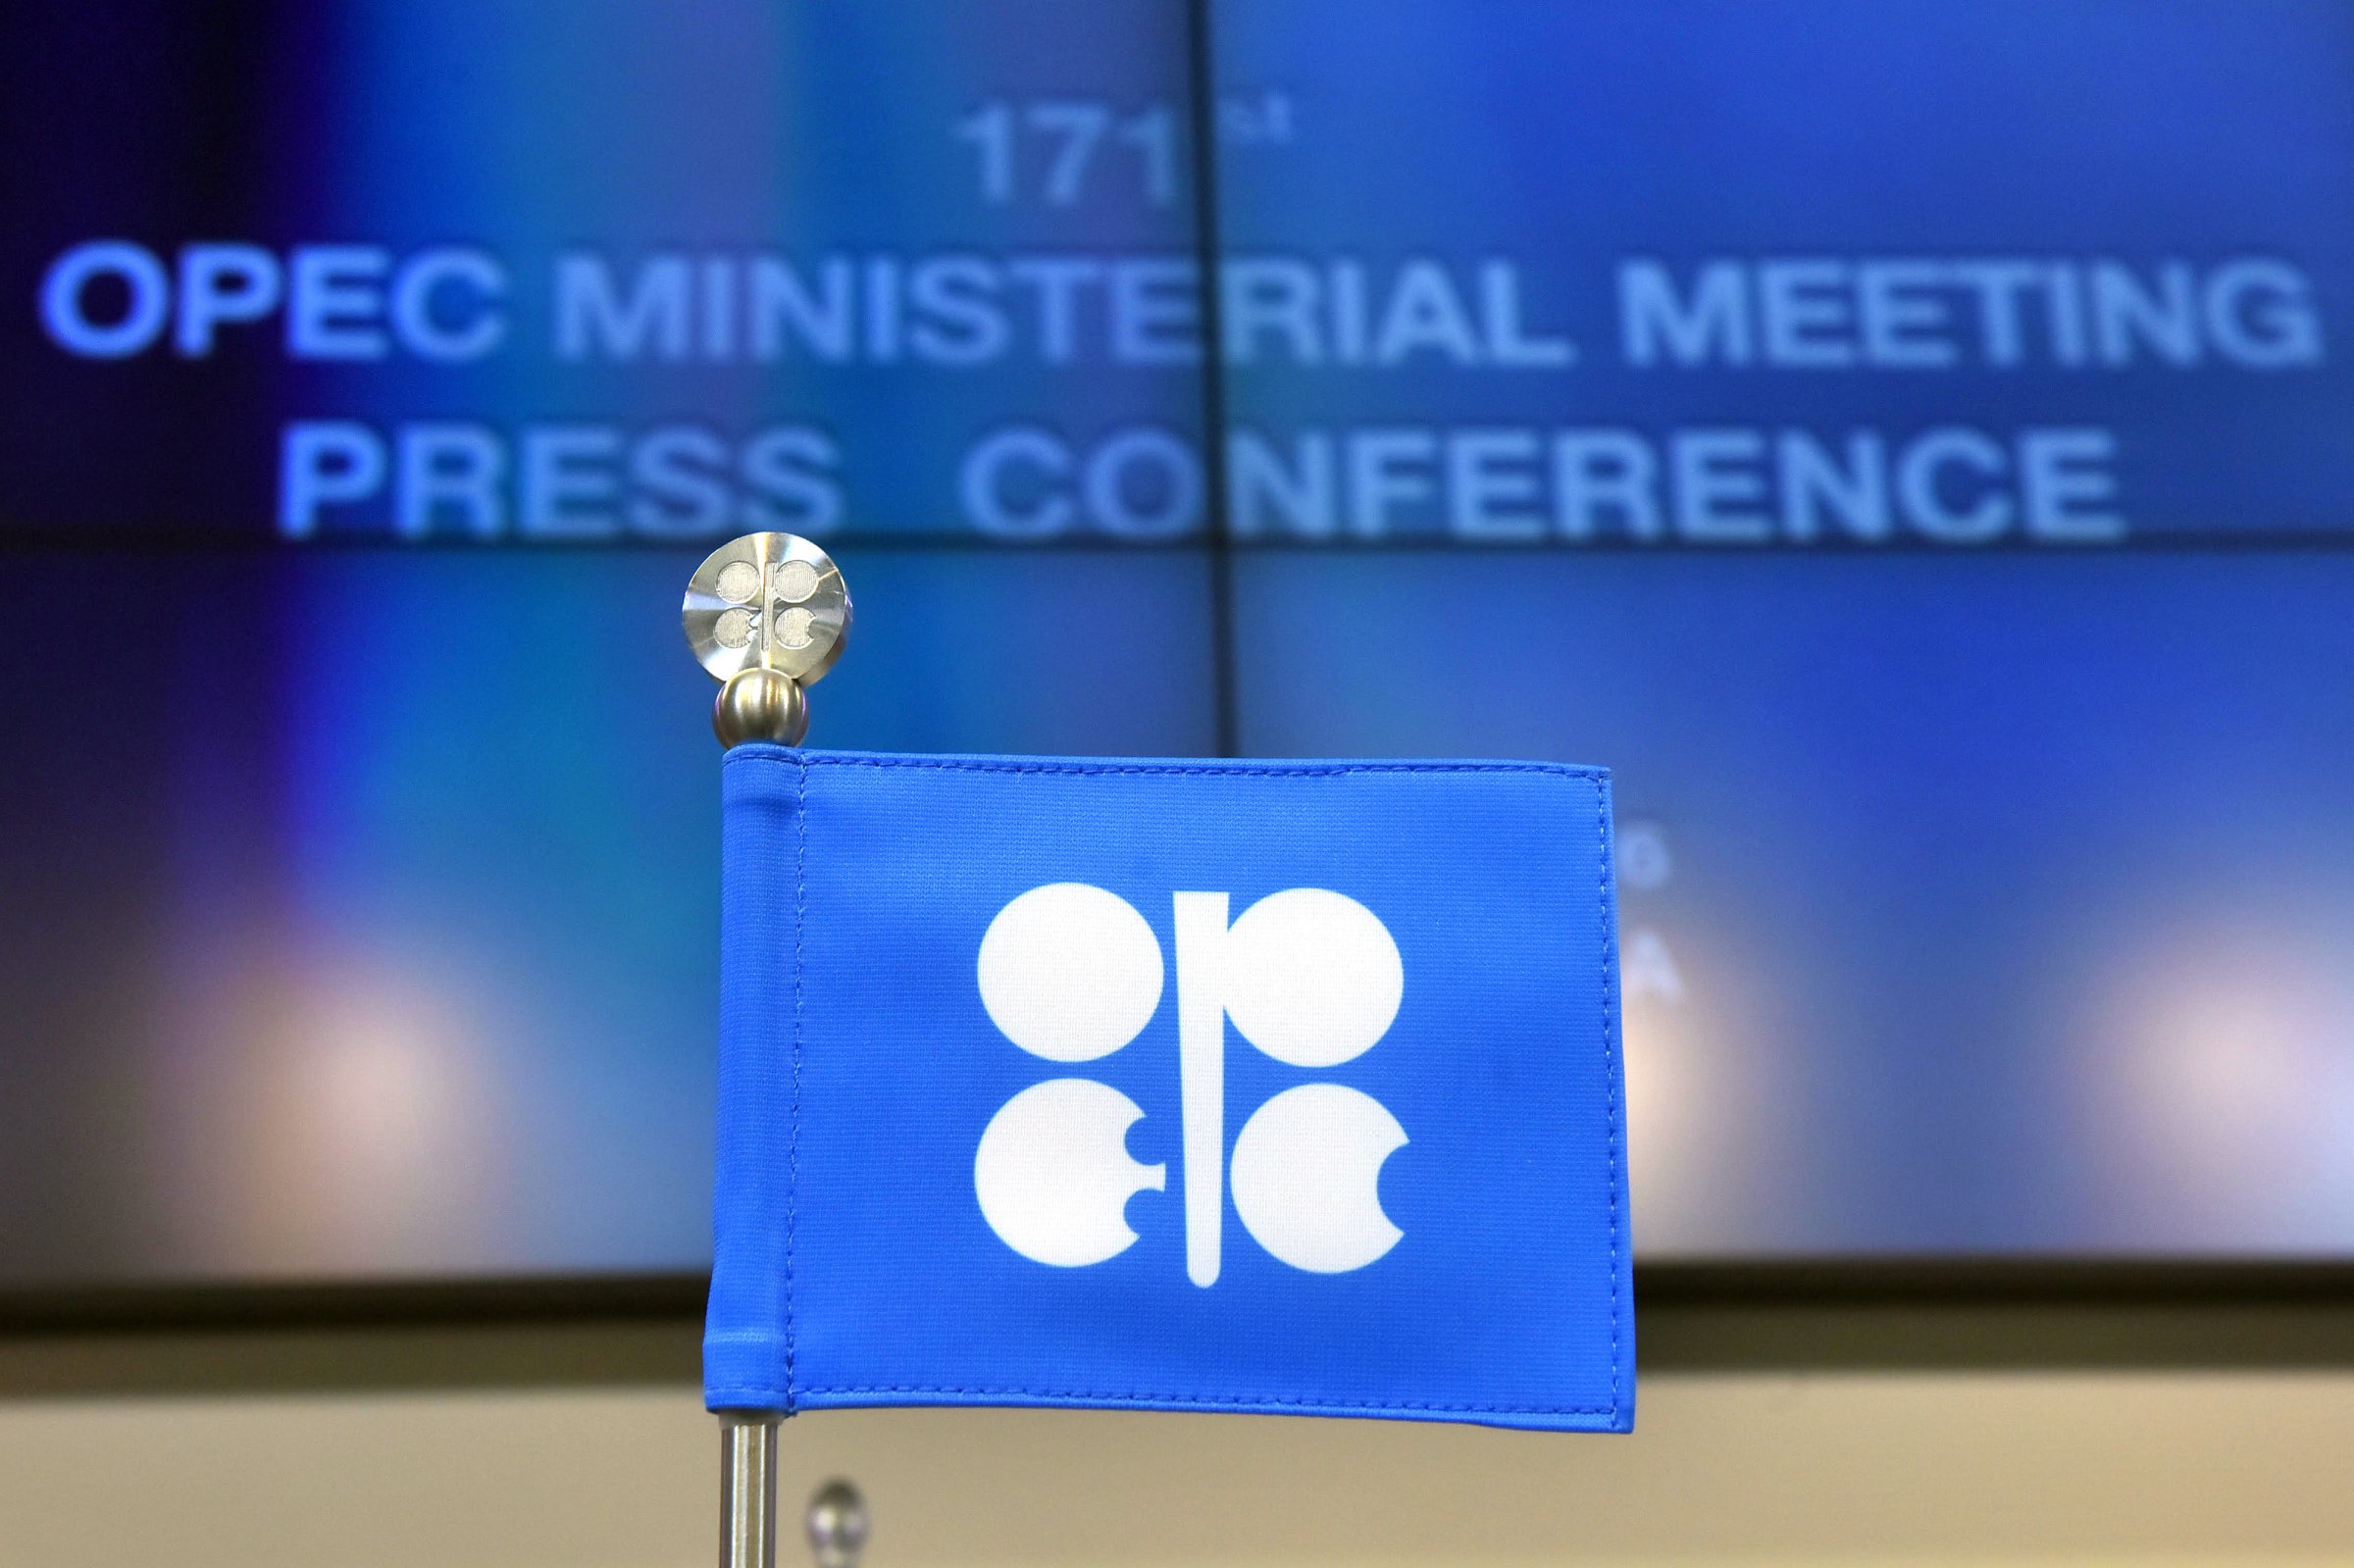 An OPEC branded flag sits on a table ahead of the 171st Organization of Petroleum Exporting Countries (OPEC) meeting in Vienna, Austria, on Wednesday, Nov. 30, 2016.